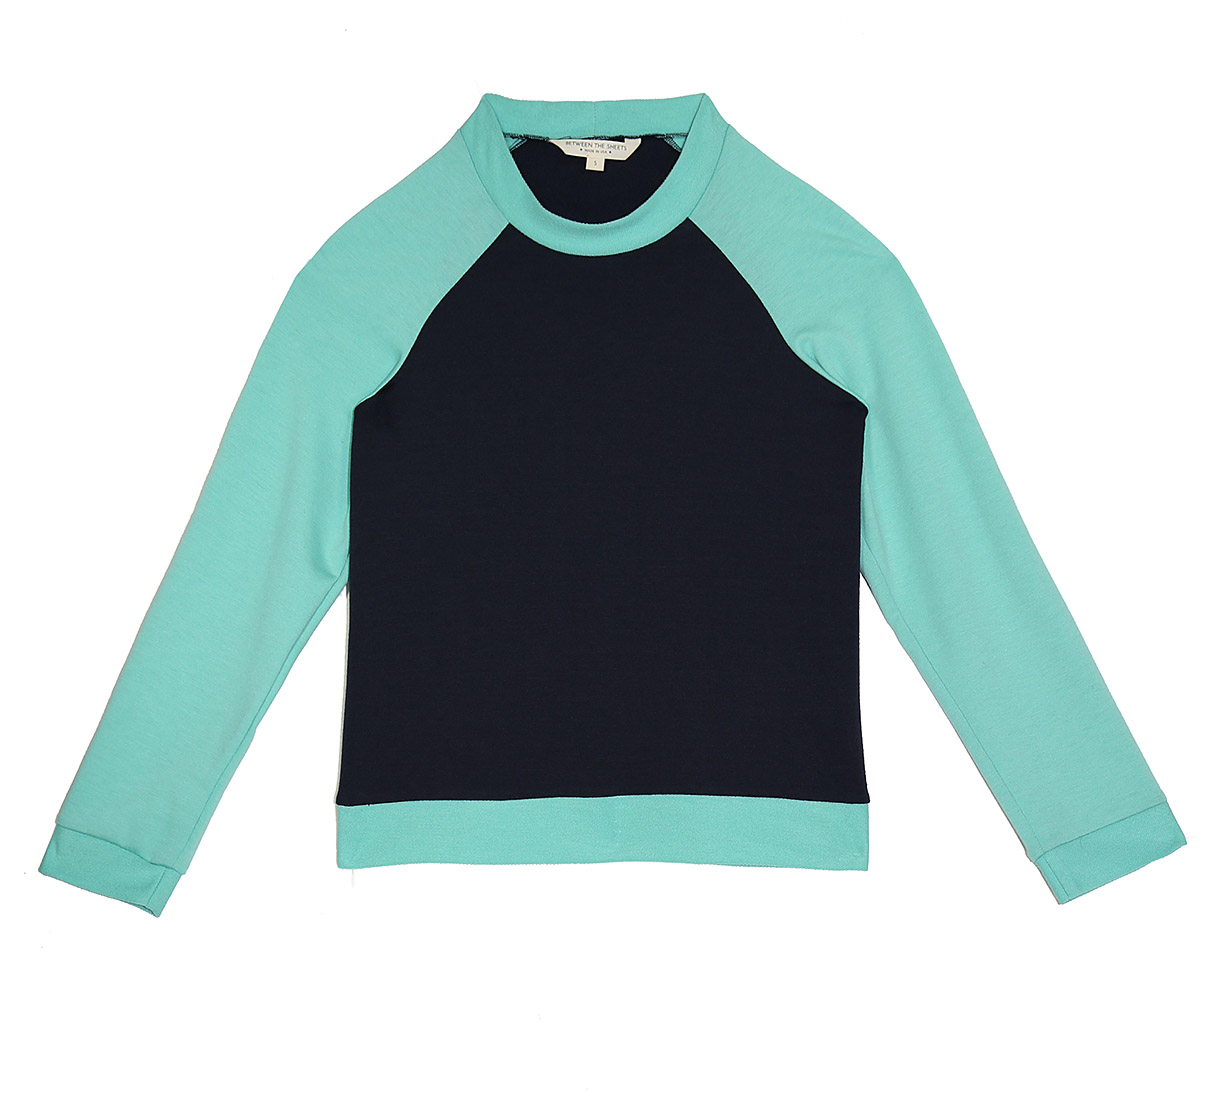 Make a Pass Navy Turquoise Raglan Long Sleeve Pullover | Color Blocked Warmups | Luxury Athleisure | Between the Sheets Loungewear